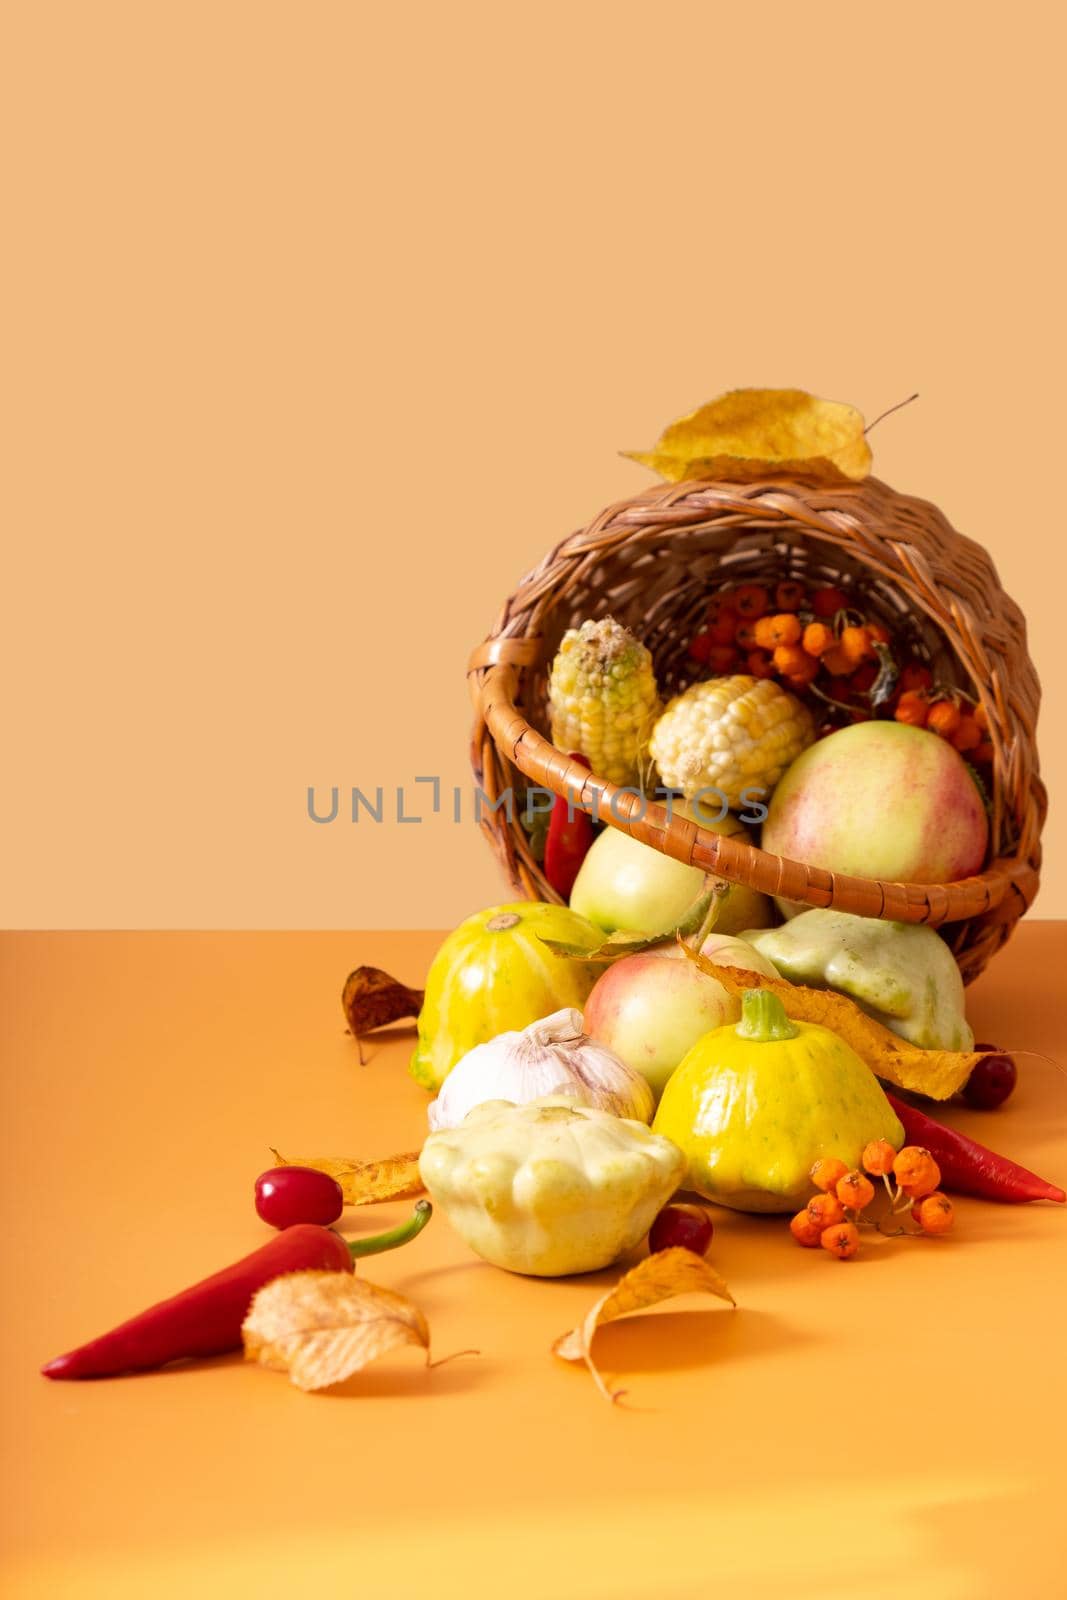 Autumn harvest basket with corn, apples, zucchini and peppers. Still life composition by ssvimaliss